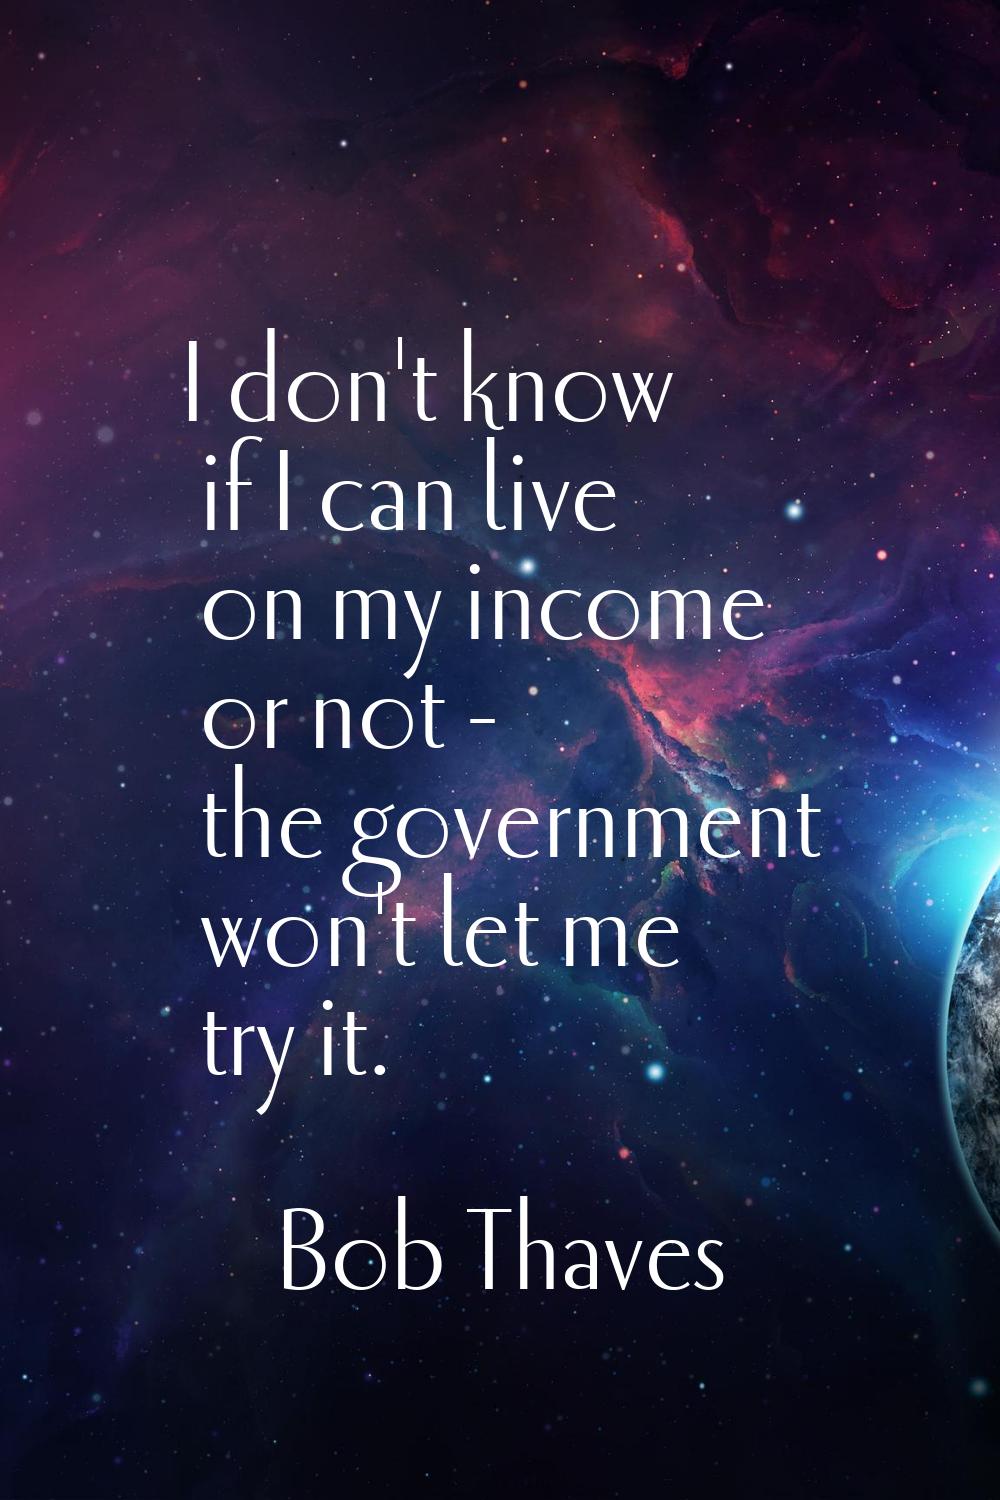 I don't know if I can live on my income or not - the government won't let me try it.